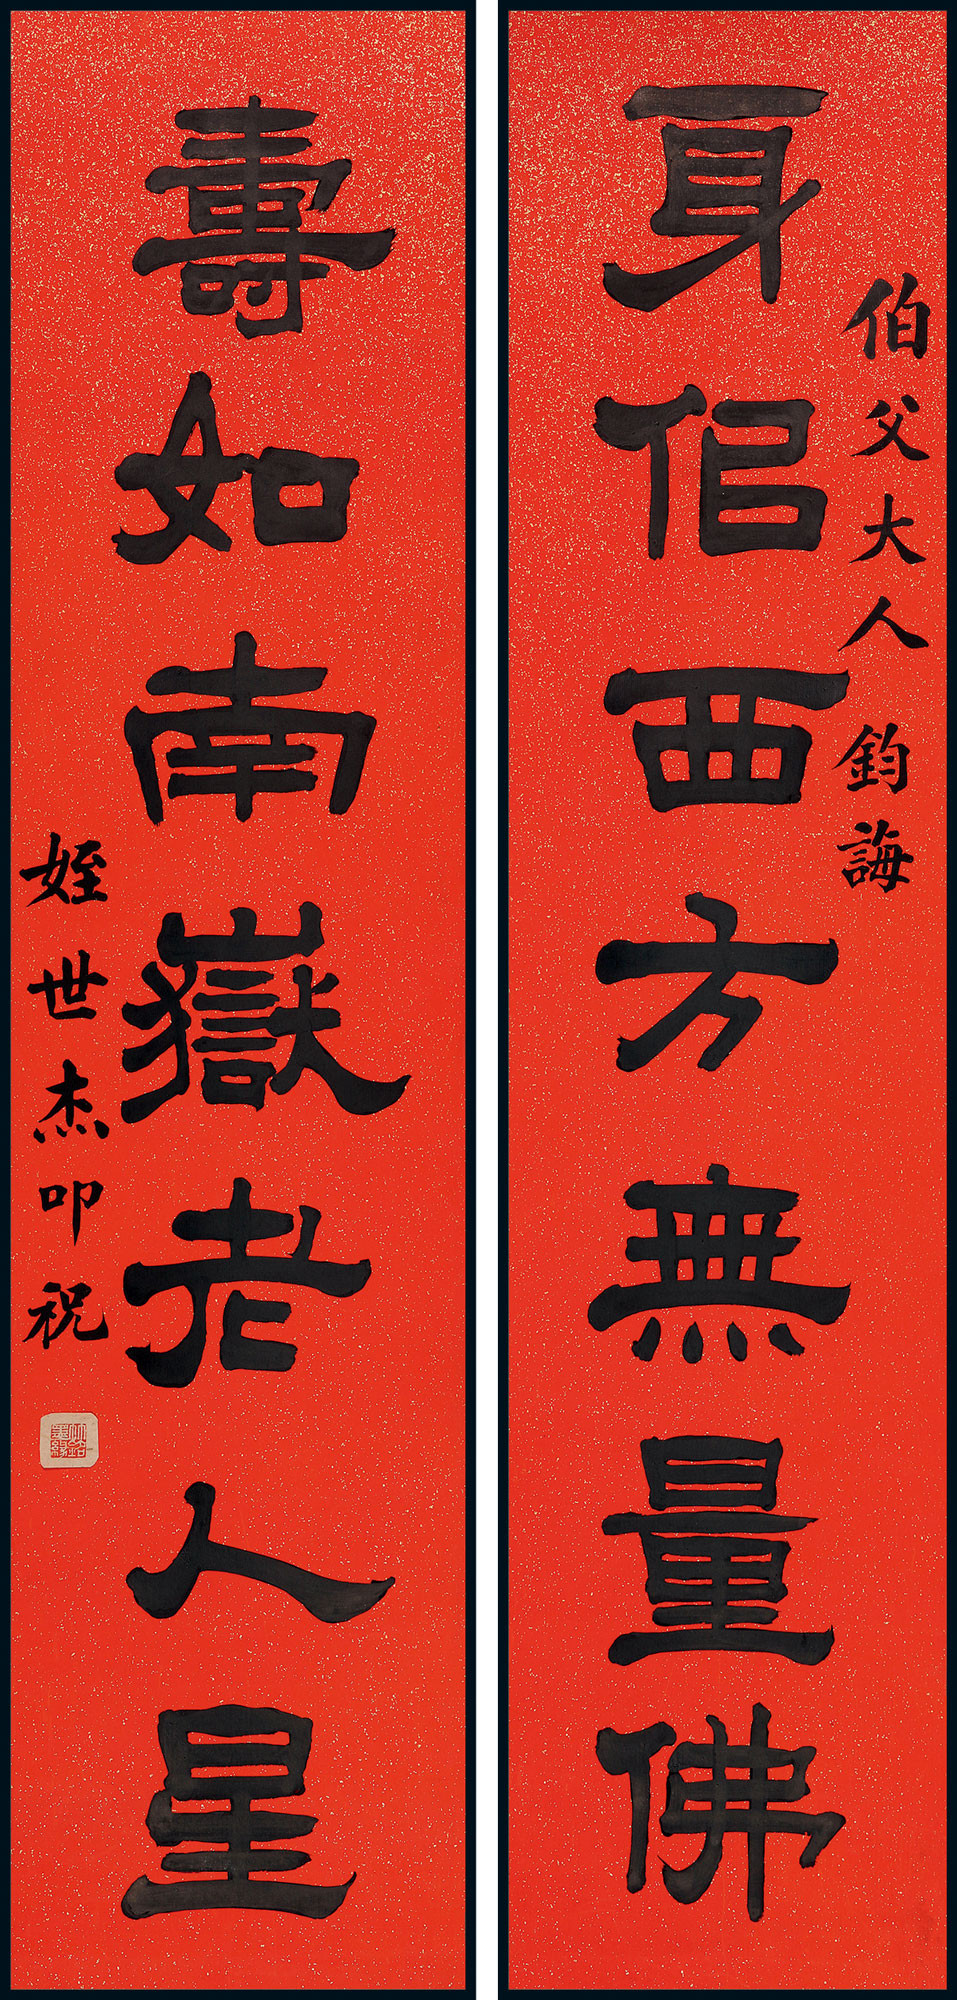 Calligraphic couplets written by Ma Zhuming